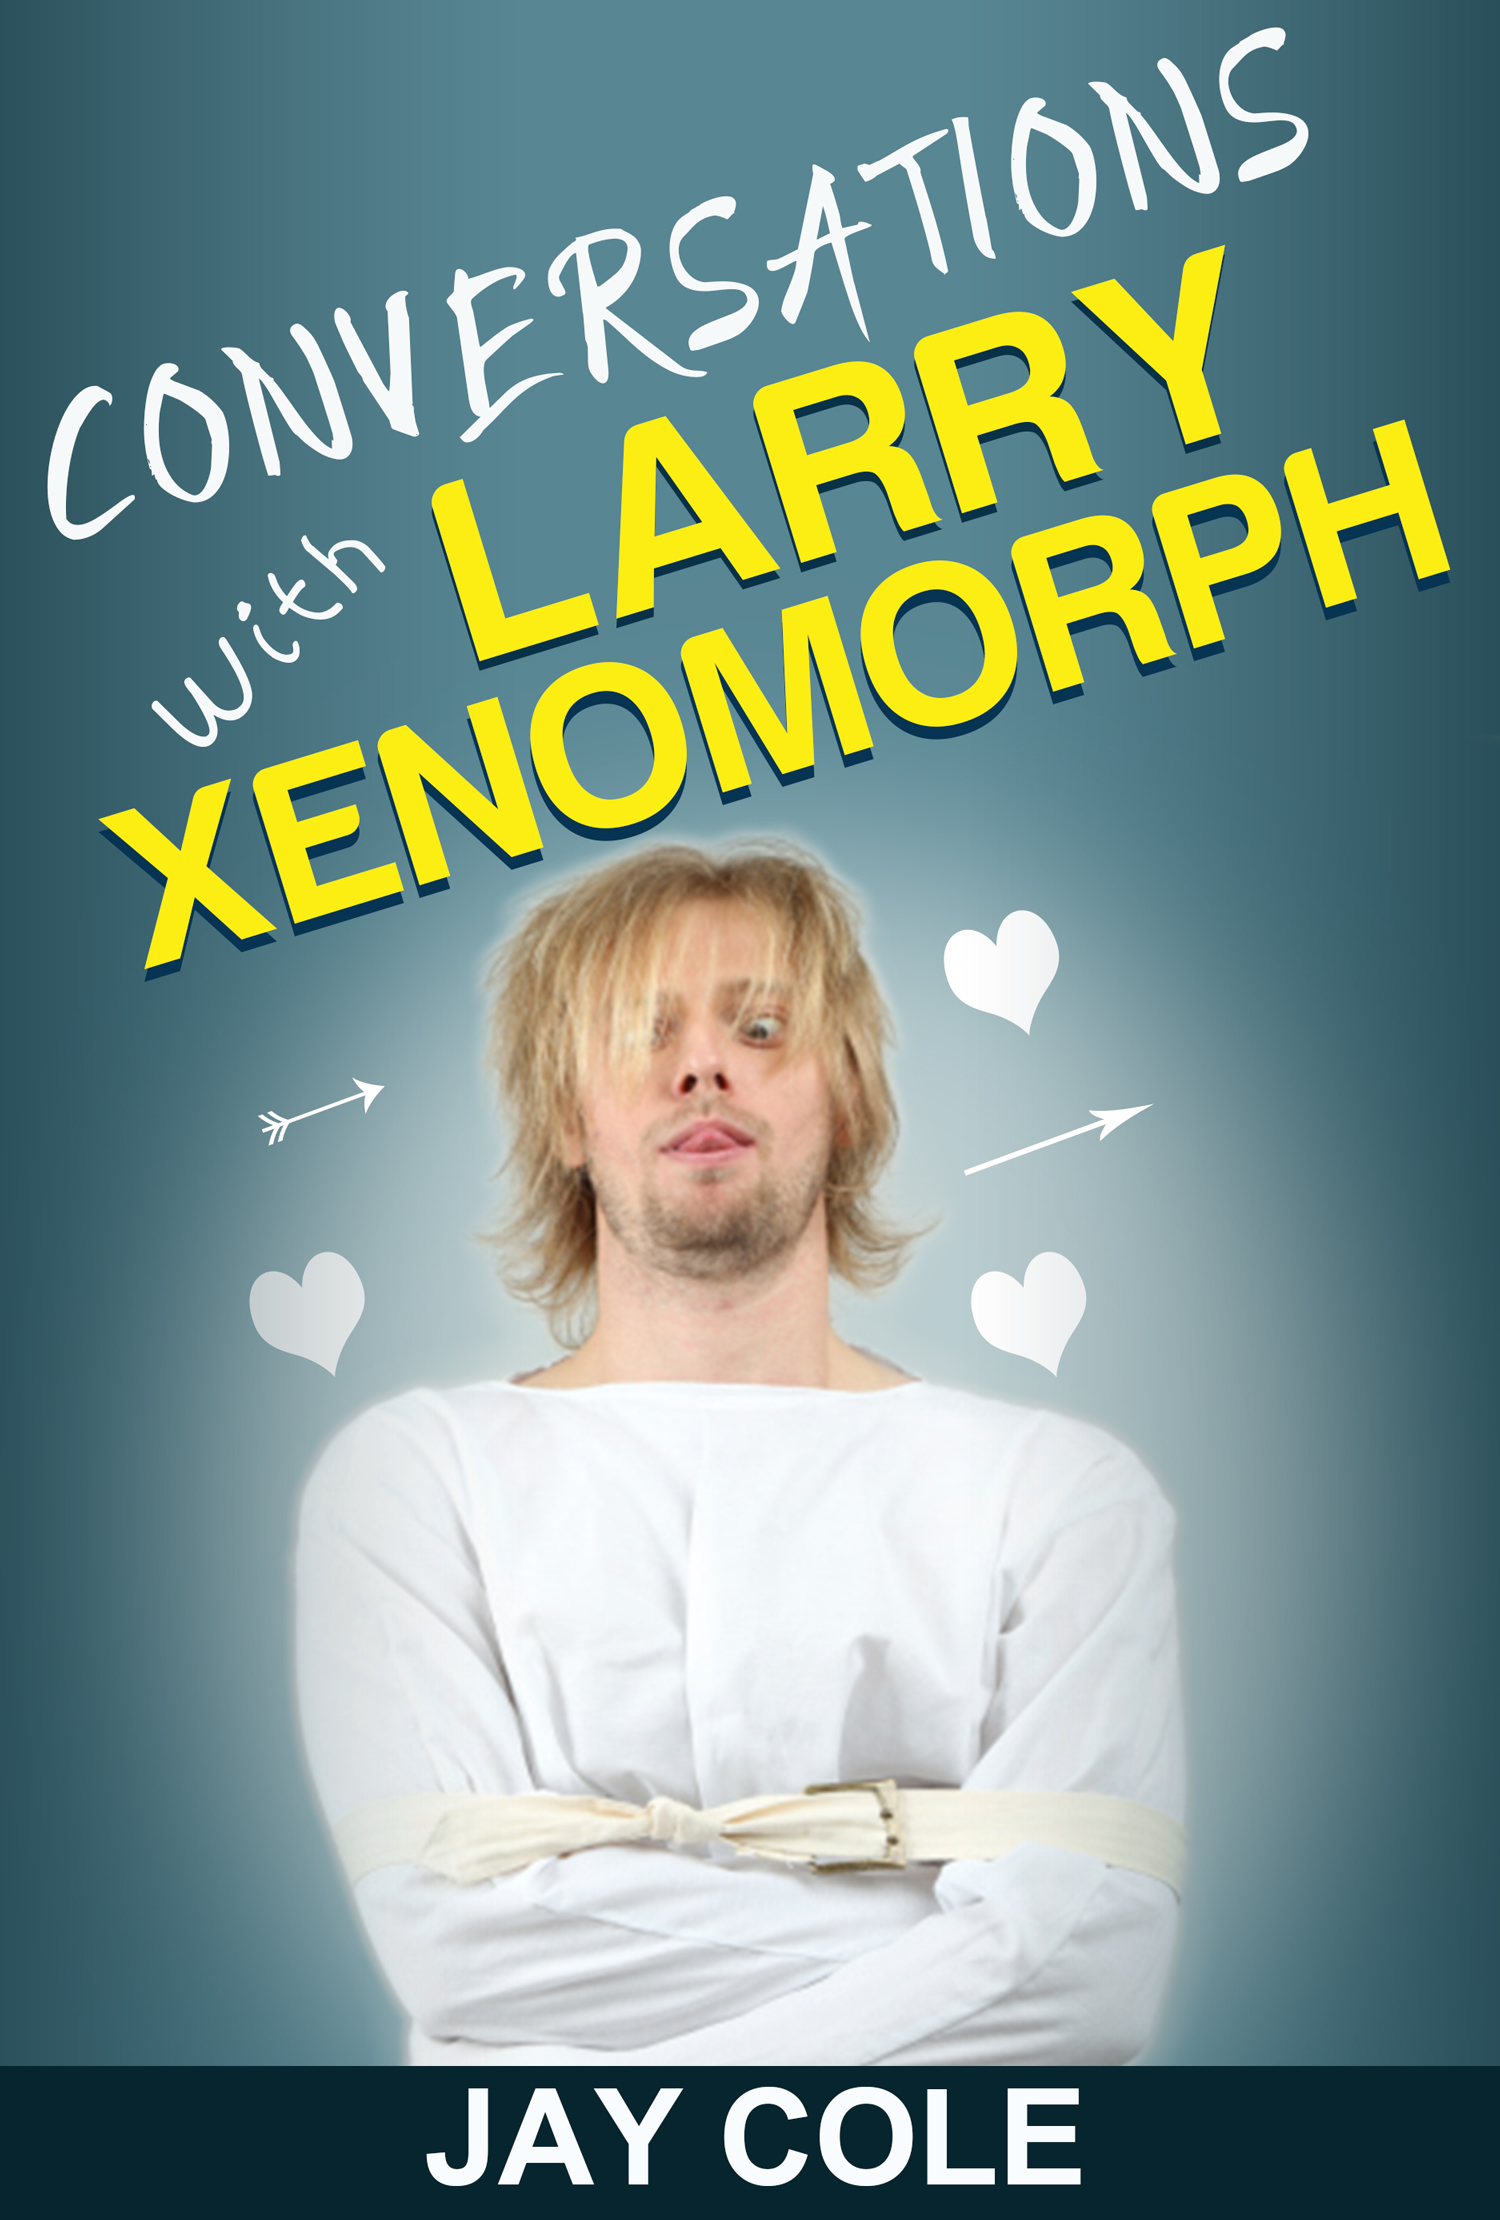 New from Jay Cole: "Conversations with Larry Xenomorph"